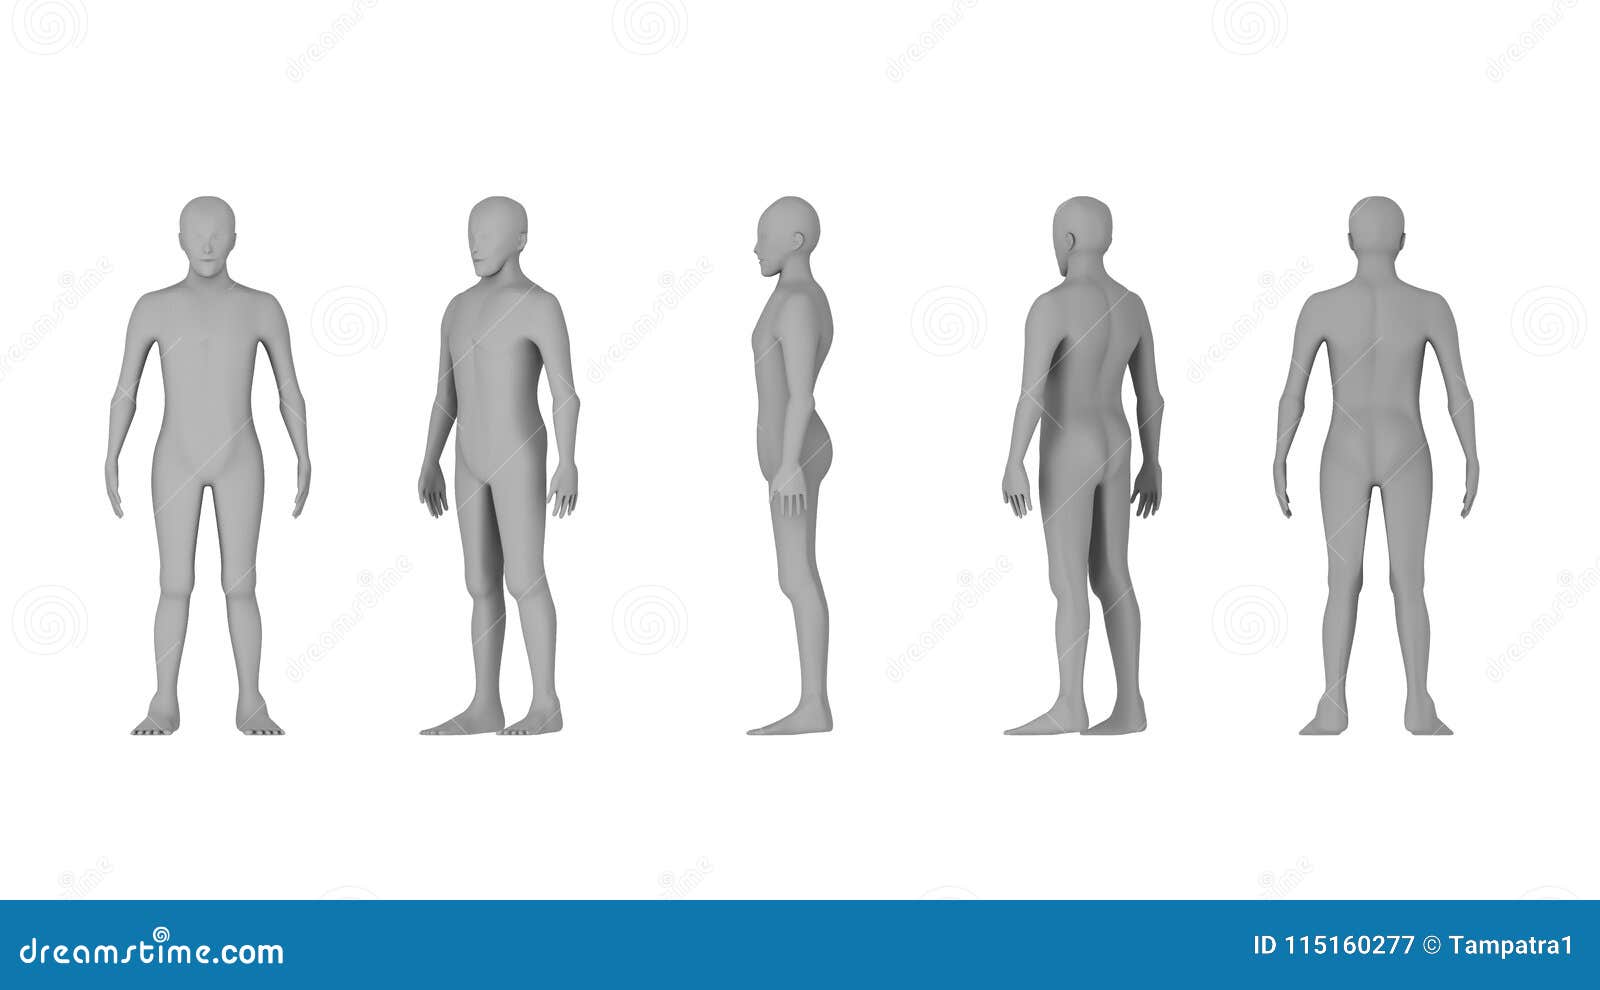 wire frame of human bodies. polygonal model on white background